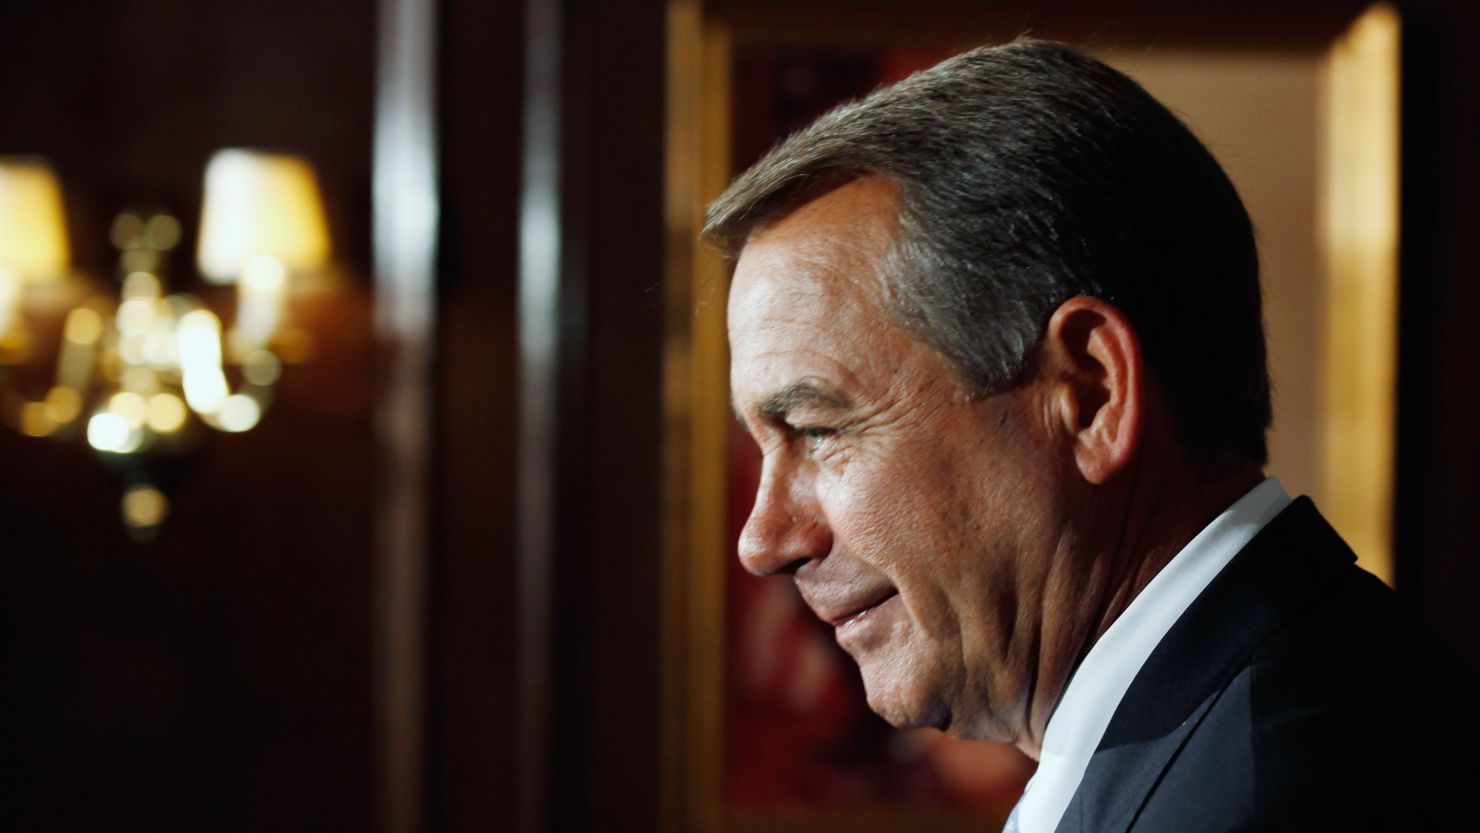 House Speaker John Boehner said the package is "a win for the American people and worthy of the president's signature."